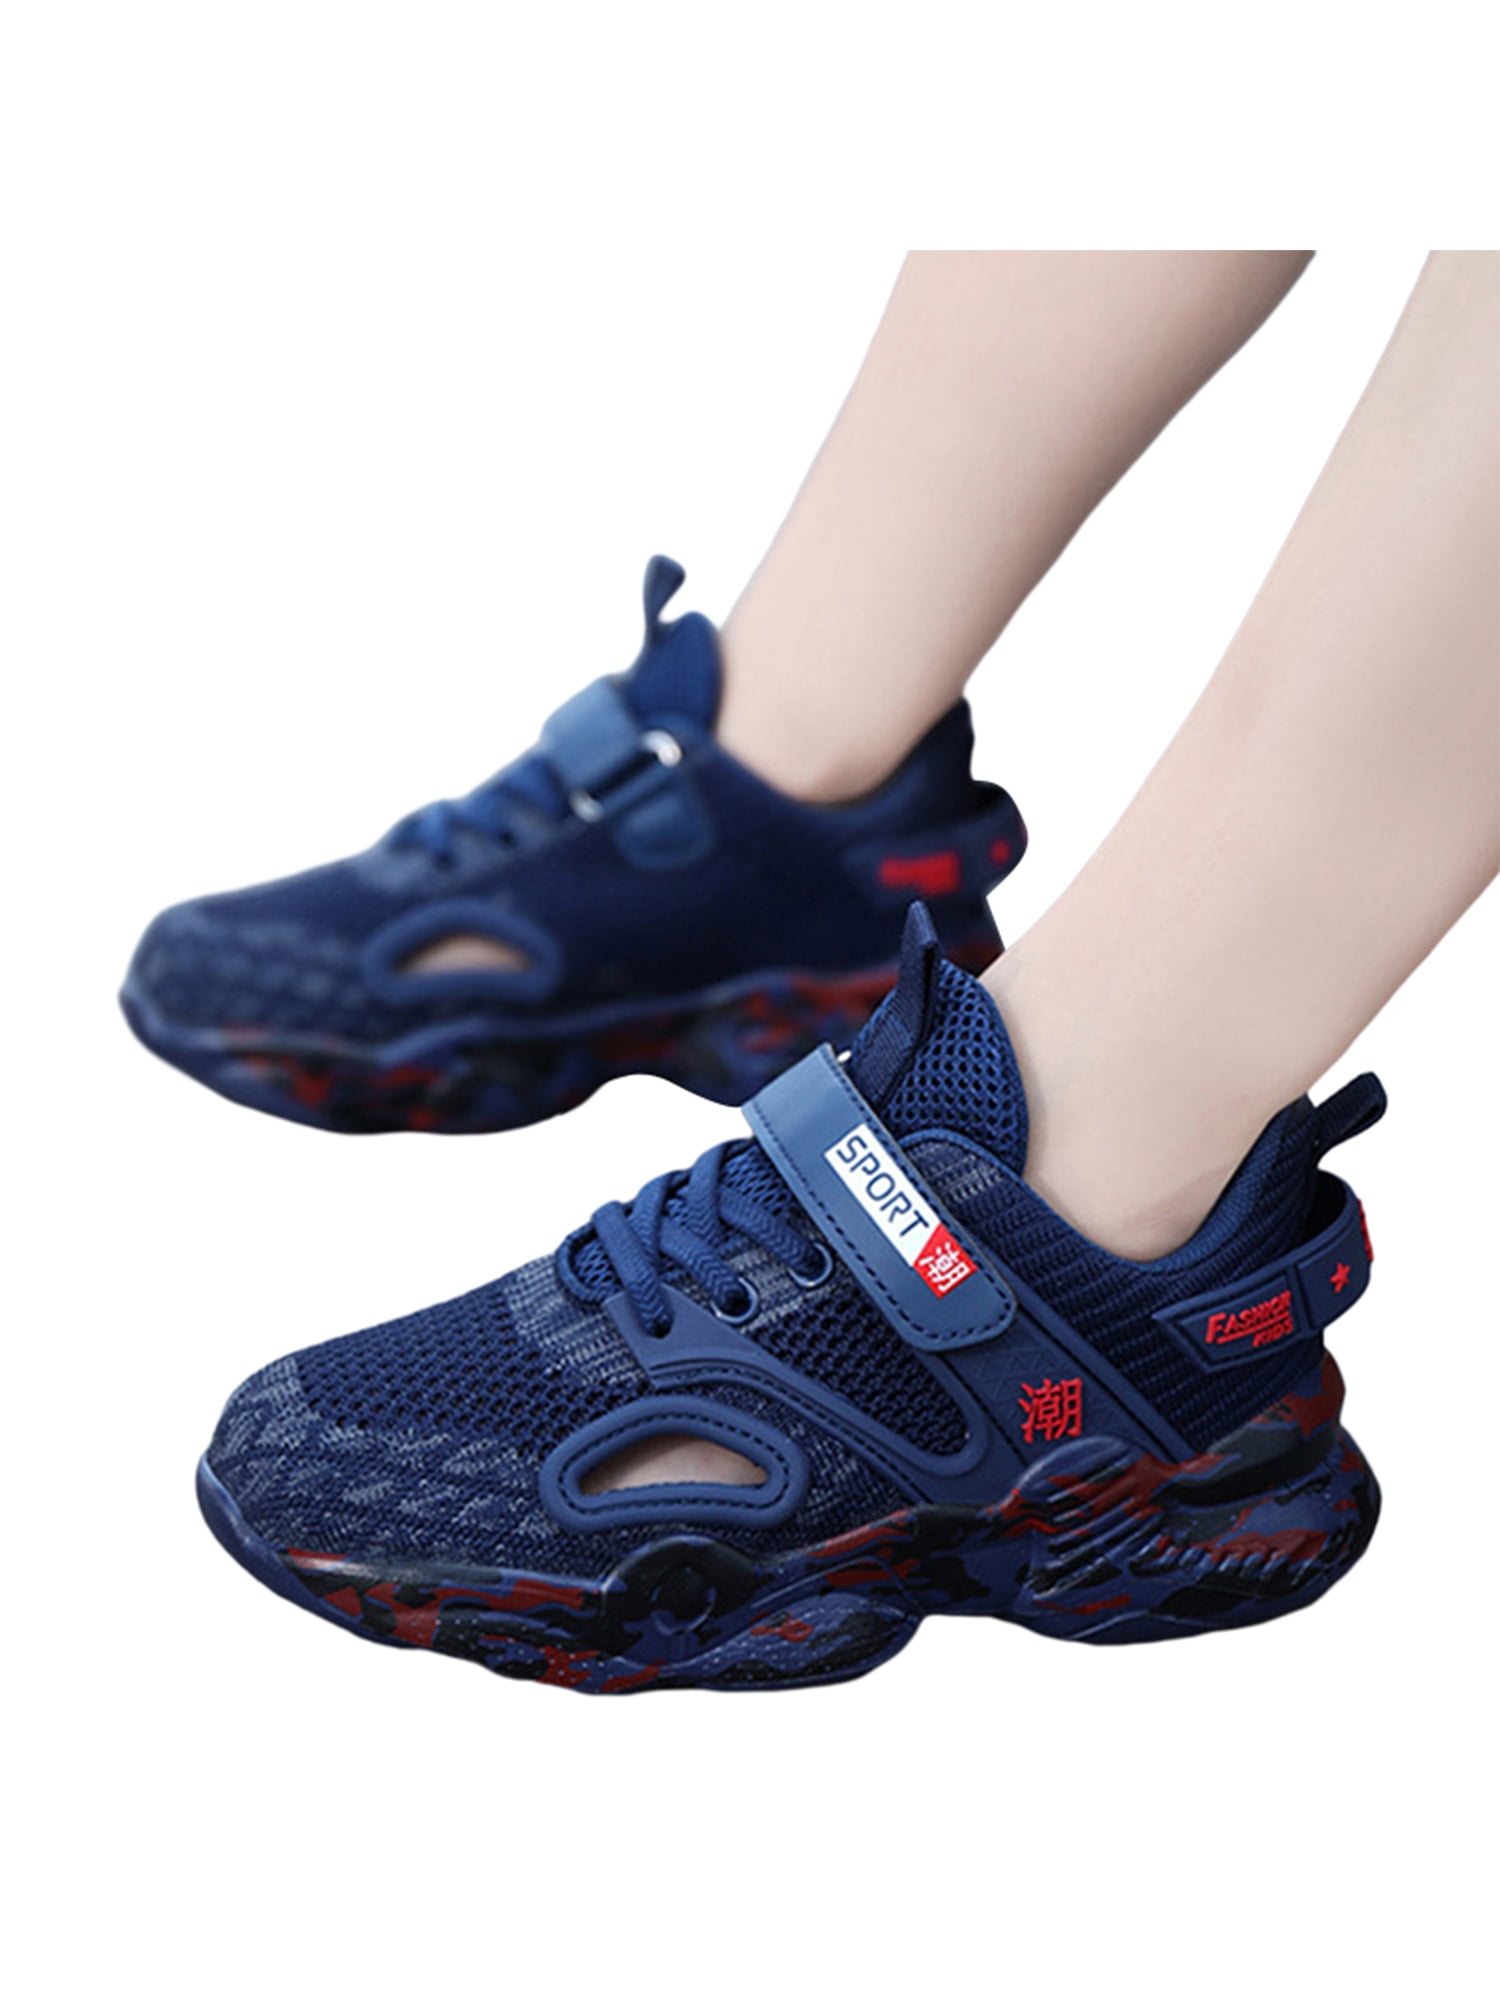 Boys Girls Trainers Kids Sneakers Athletic Casual Running Shoes Child Sports Walking Shoes Fashion Comfortable